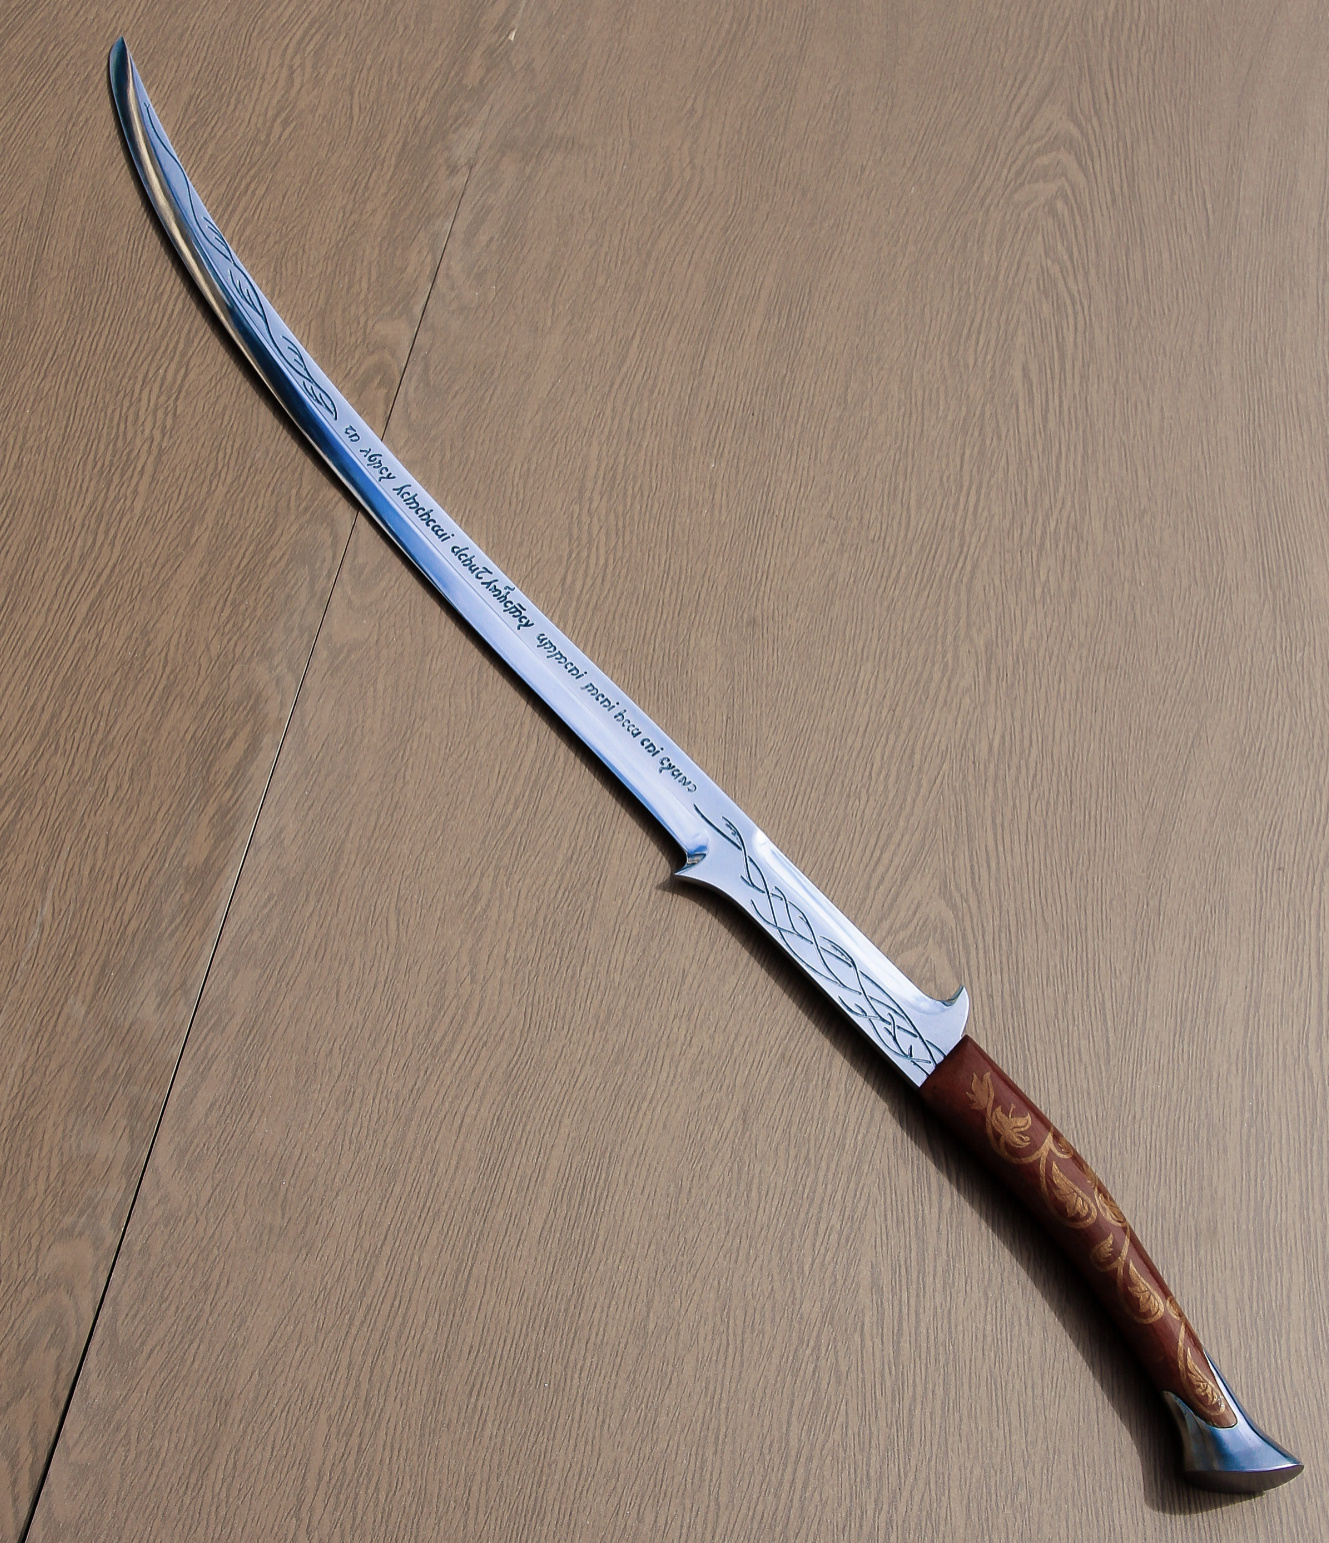 the Sword Hadhafang of Arwen from The Lord of the Rings